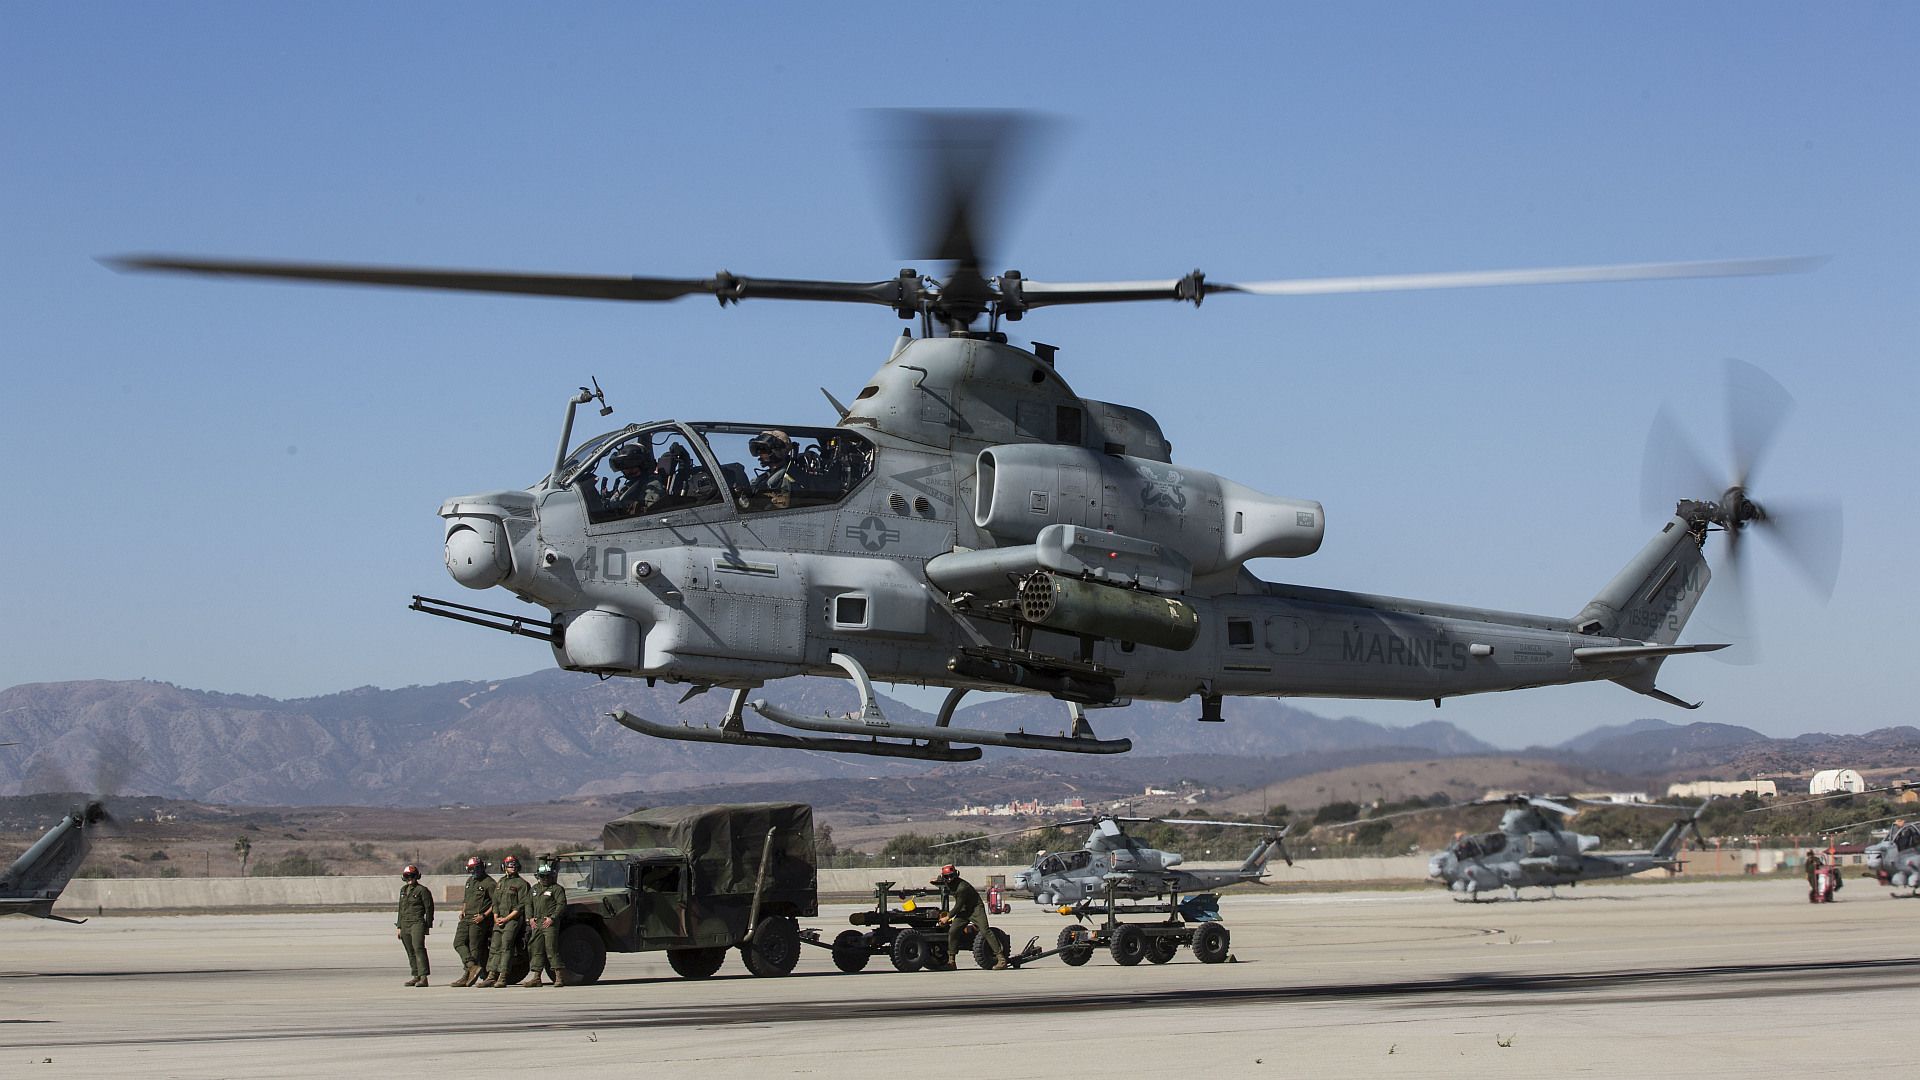 AH 1Z Viper Assigned To Marine Light Attack Helicopter Squadron 369